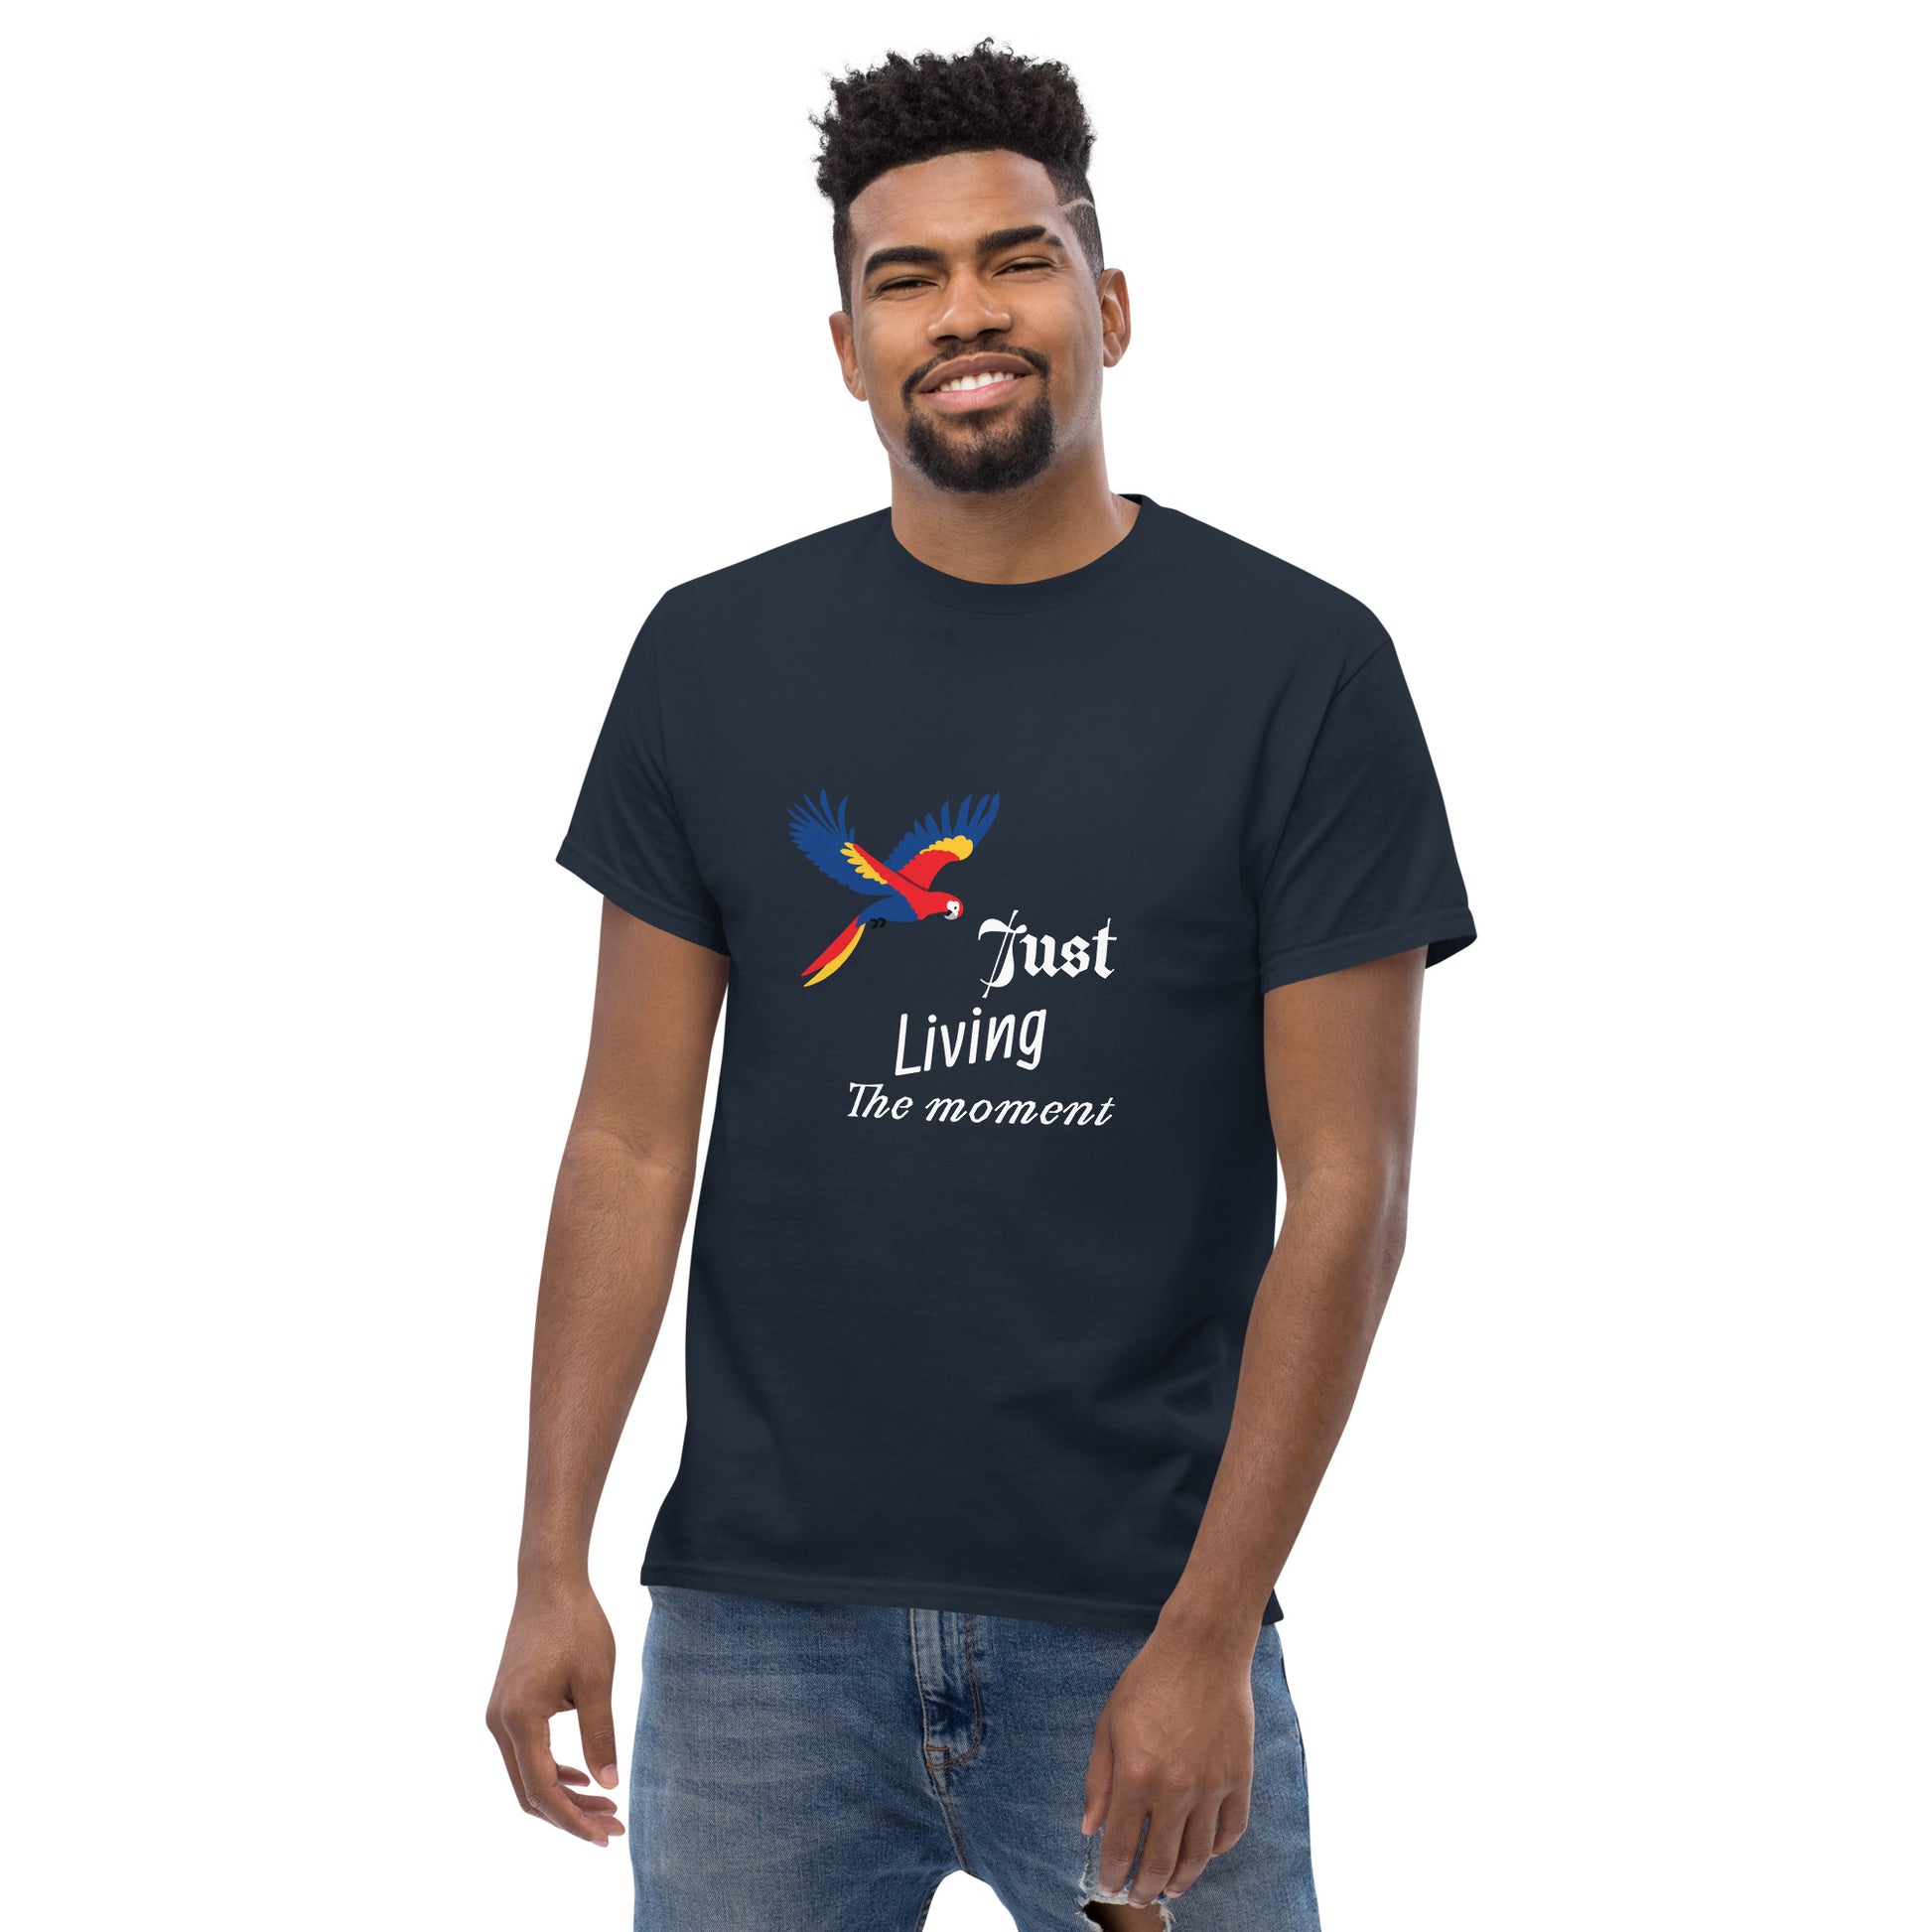 Inspirational  Men's tee, Positive quote: Just Living The Moment" motivational T-shirt, Words Of Wisdom, Motivational Clothes Unique Gift Idea for boy, brother, uncle, professor, grandfather, dad, young man - navy t-shirt